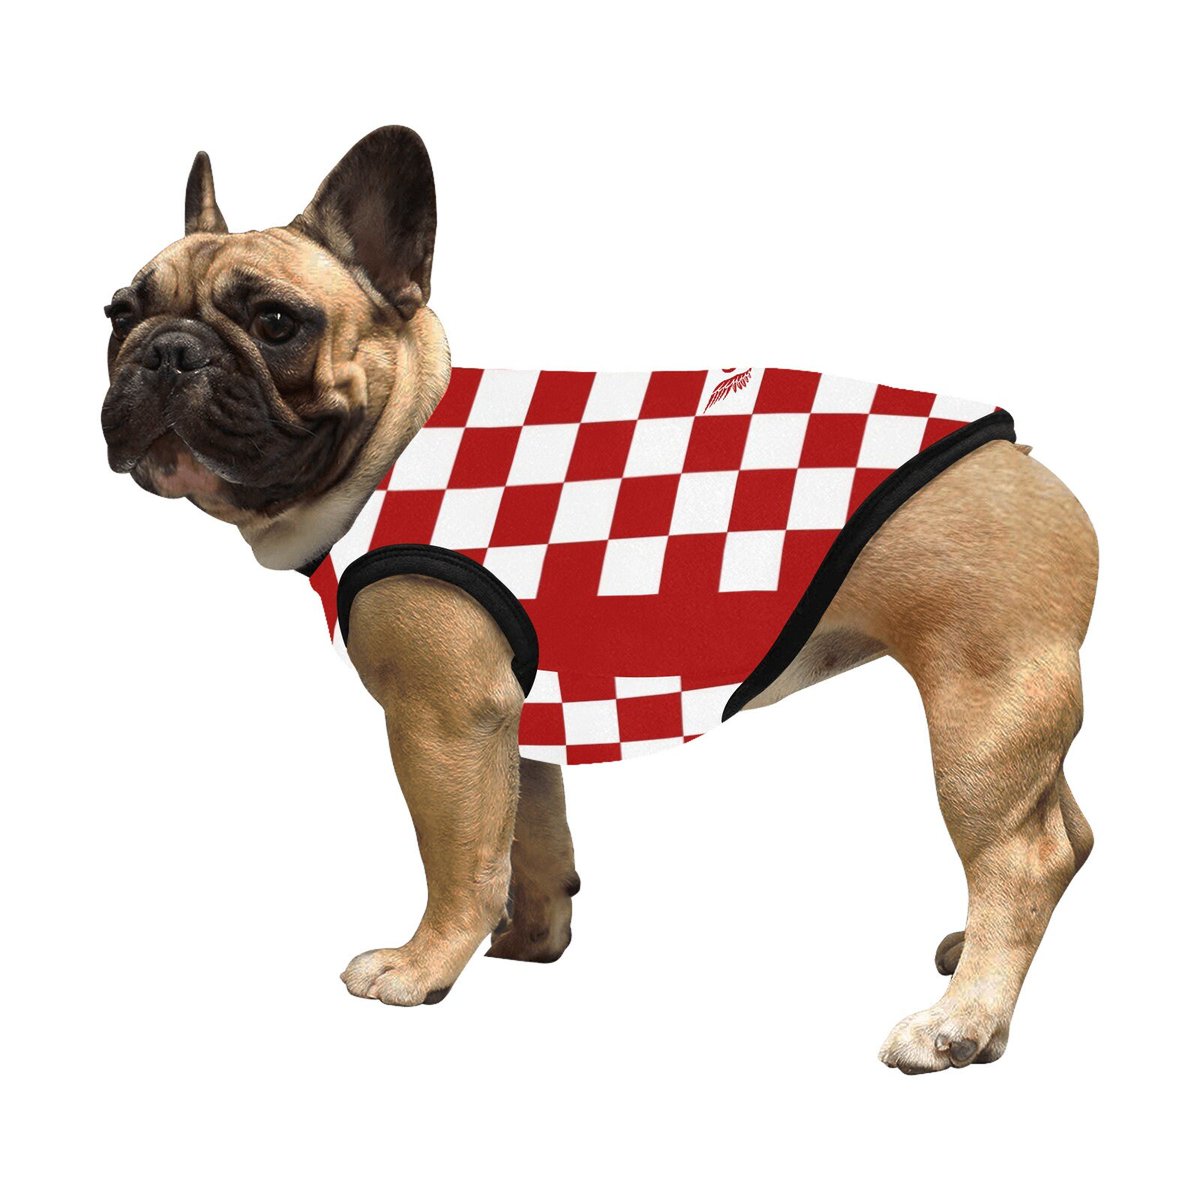 New in our store👉bit.ly/buy-eco👈pet accessories in Croatian style.  Surprise your beloved pet with a cool fashion item🥼 Discounts up to 30%
#pets #petaccessories #dogaccessories #dogs #Croatia #croatianfashion #petstagram #dogfashion #sales #Discounts  #fashionstyle